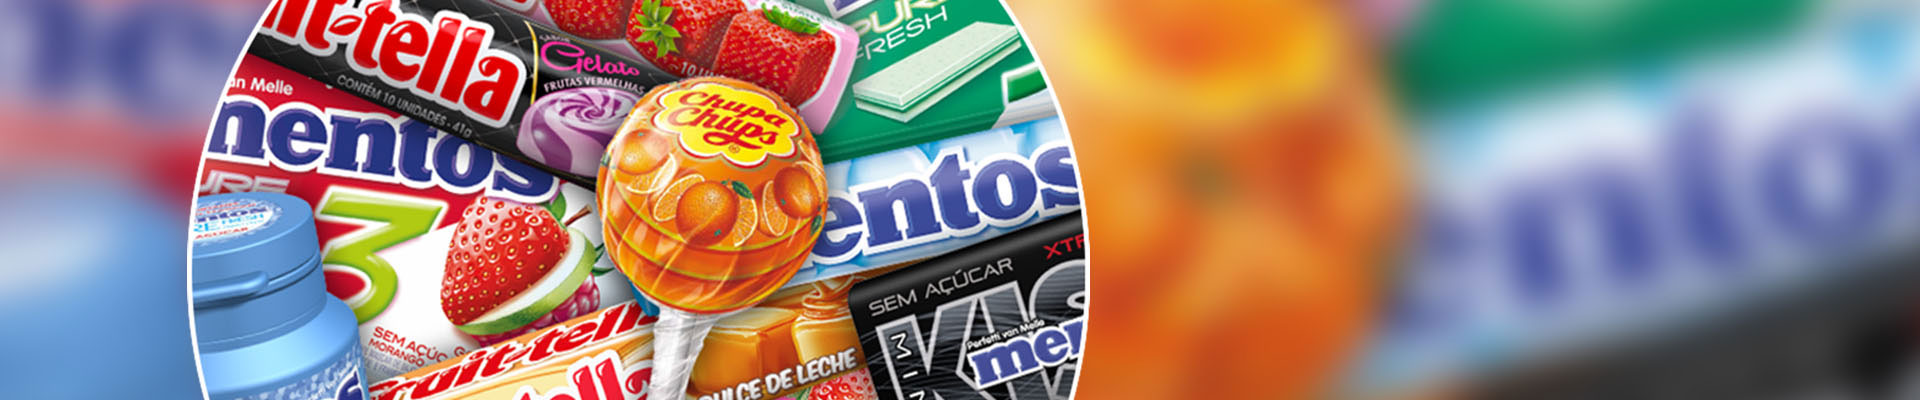 X-Rite Solutions Help Perfetti Van Melle Improve Color Deviation and Align Their Supply Chain Case Study